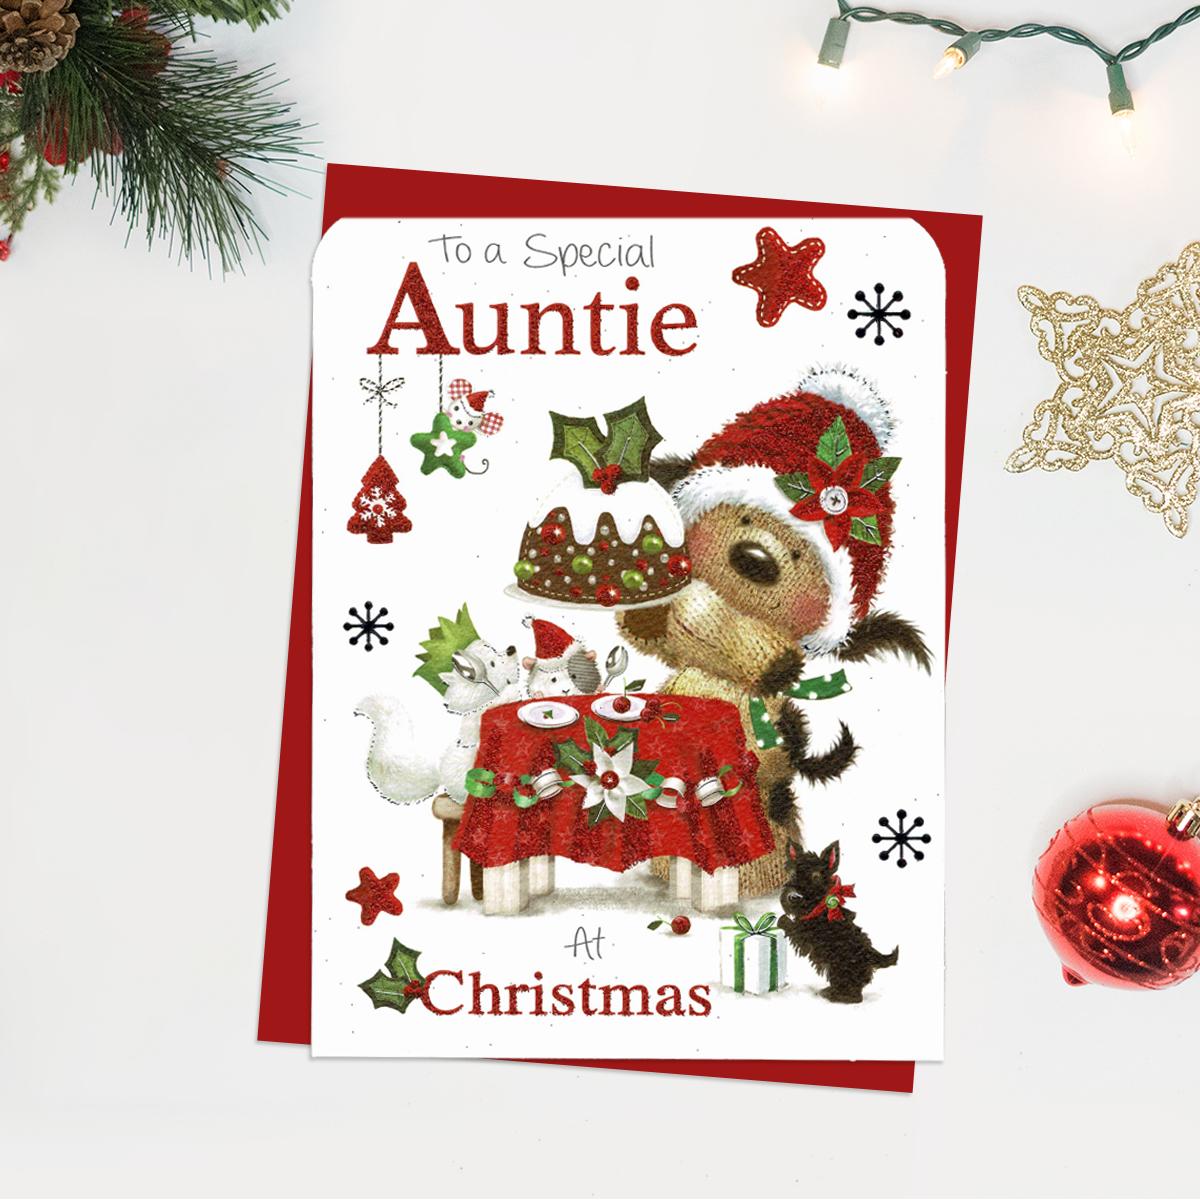 To A Special Auntie At Christmas Showing A Cute Dog And Animal Friends Around A Christmas Table. Finished With Red Glitter And Envelope